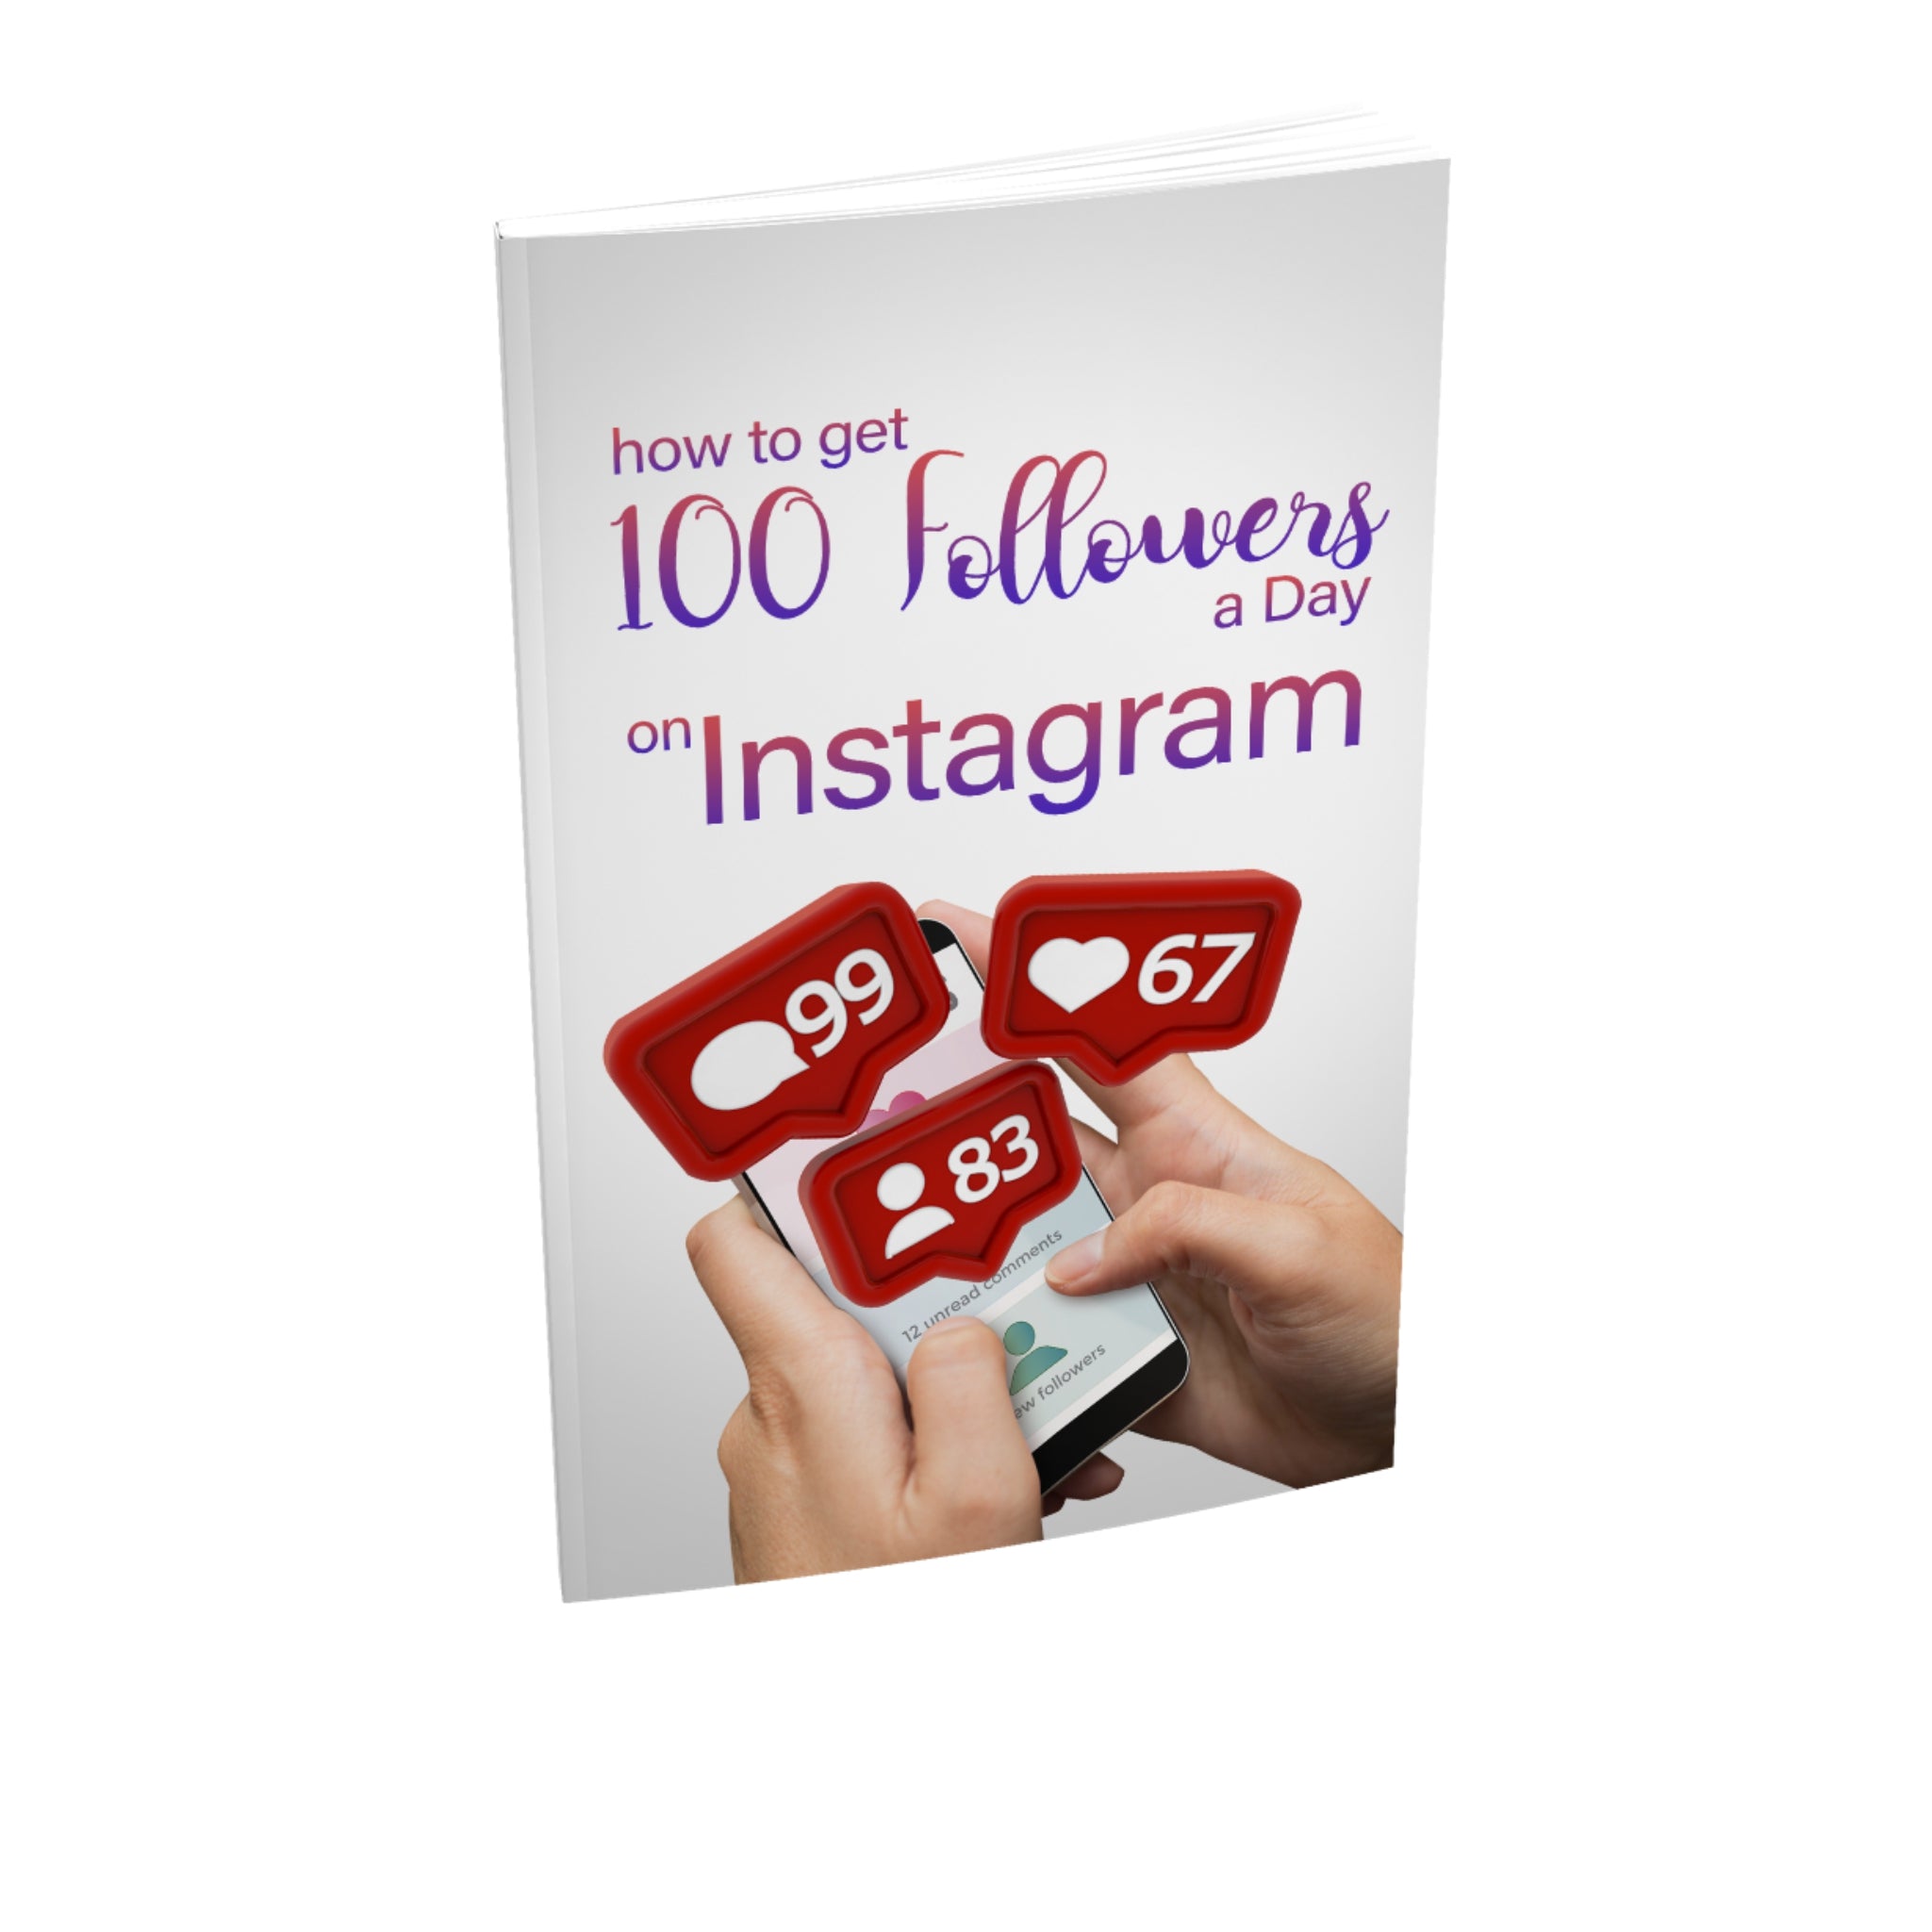 How To Get 100 Followers a Day On Instagram Ebook